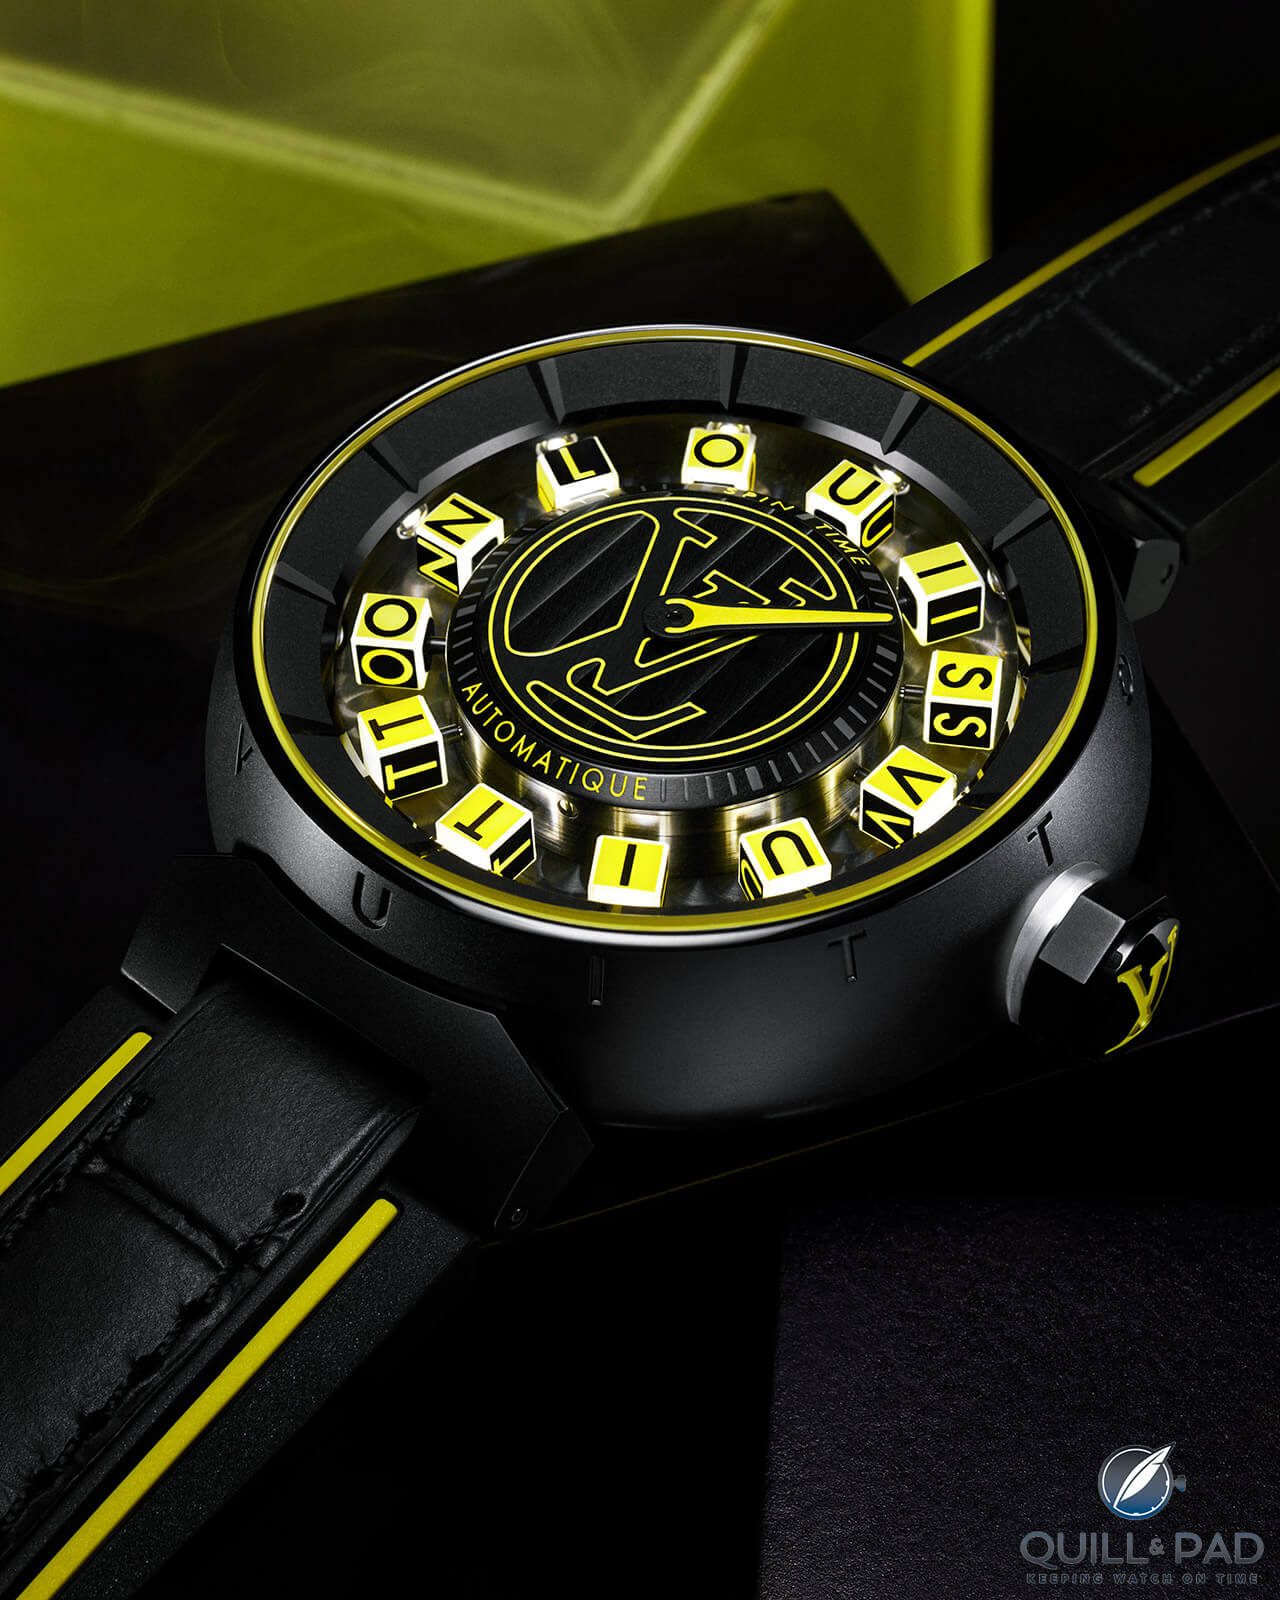 Introducing The Louis Vuitton Tambour Twenty Limited Edition